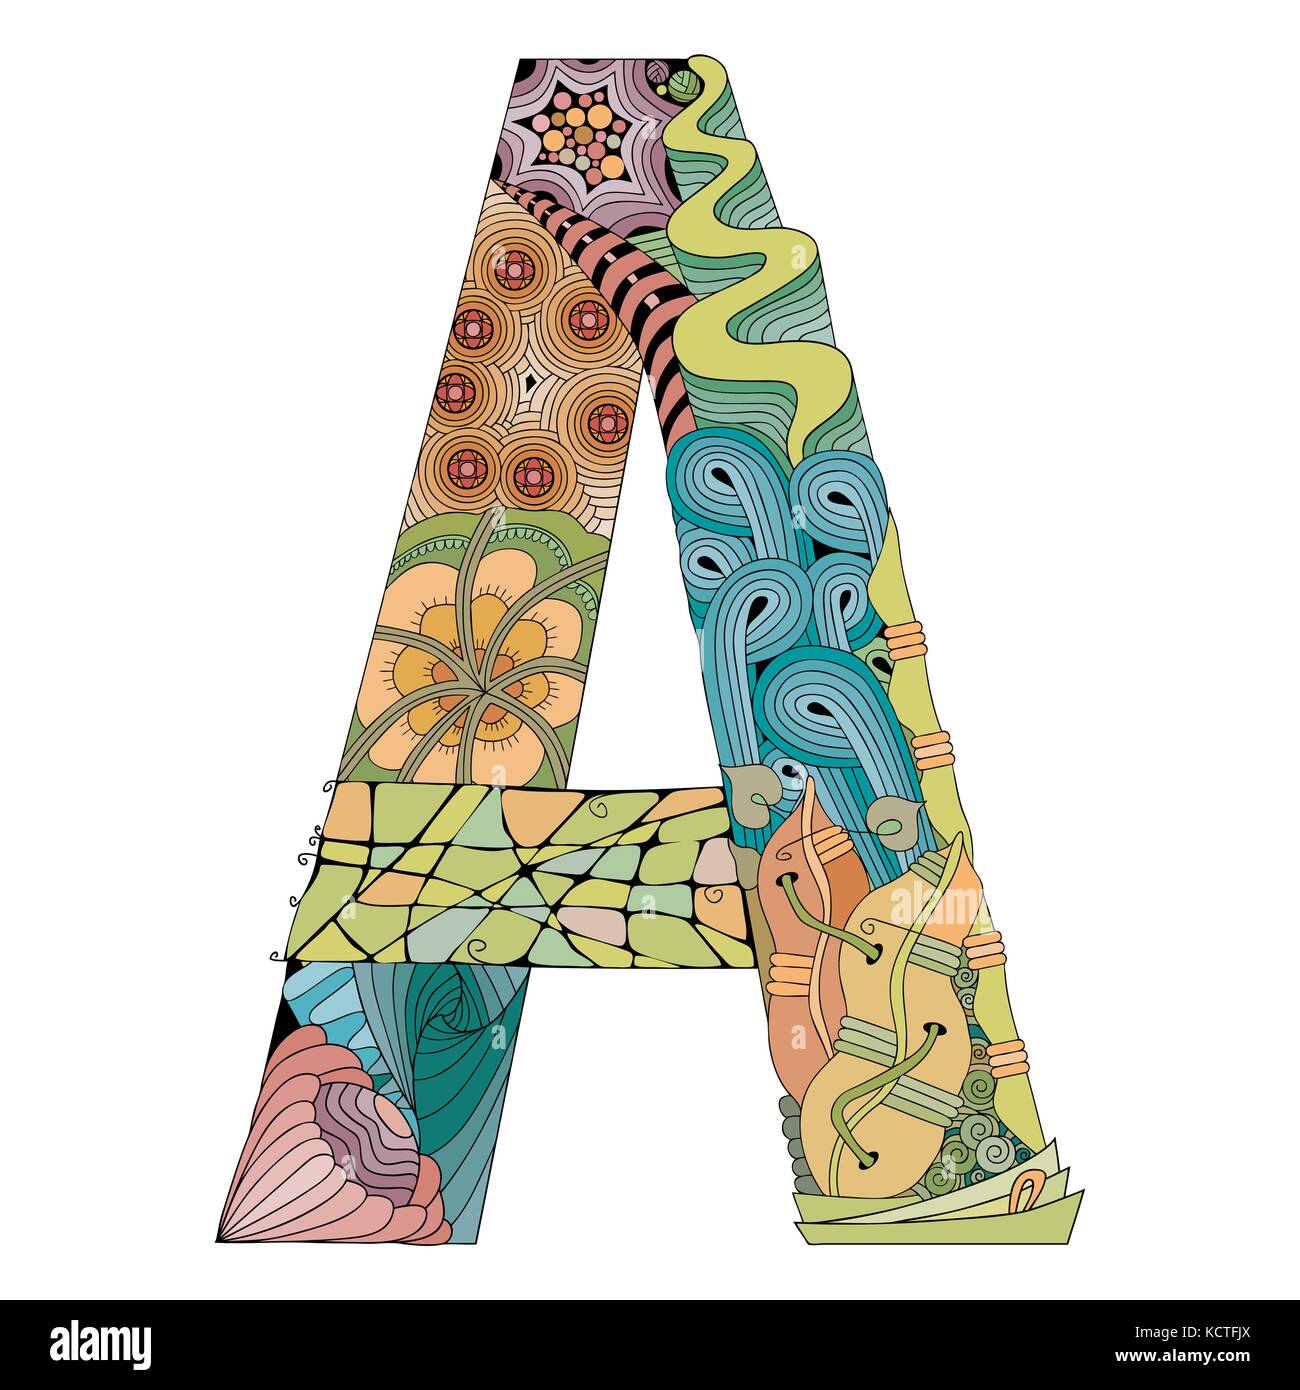 Hand-painted art design. Letter A zentangle object Stock Vector Image ...